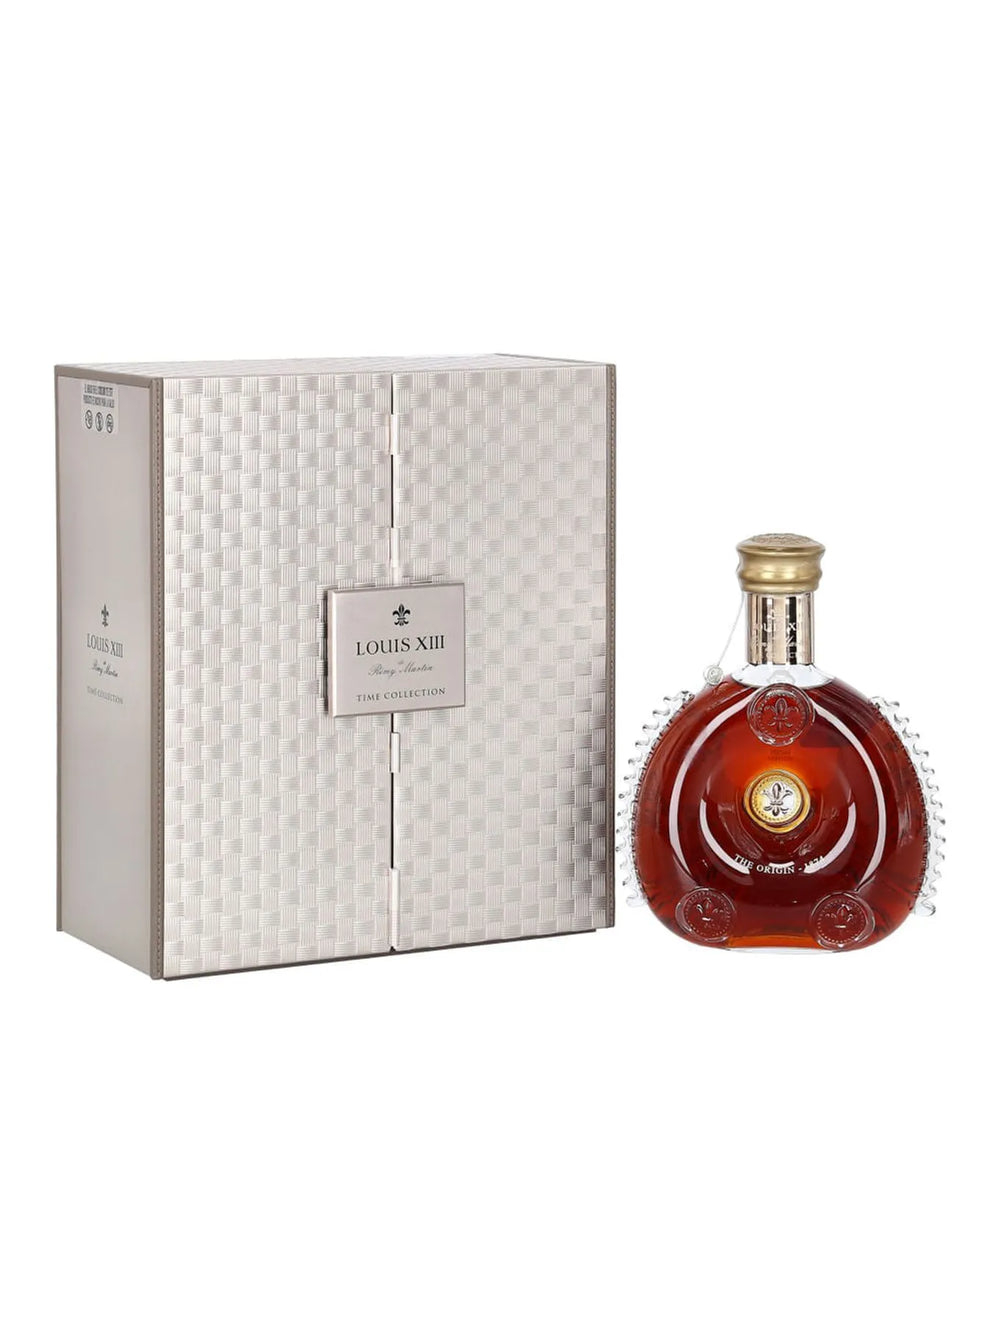 Cognac Louis XIII Remy Martin Time Colection - 700 Ml